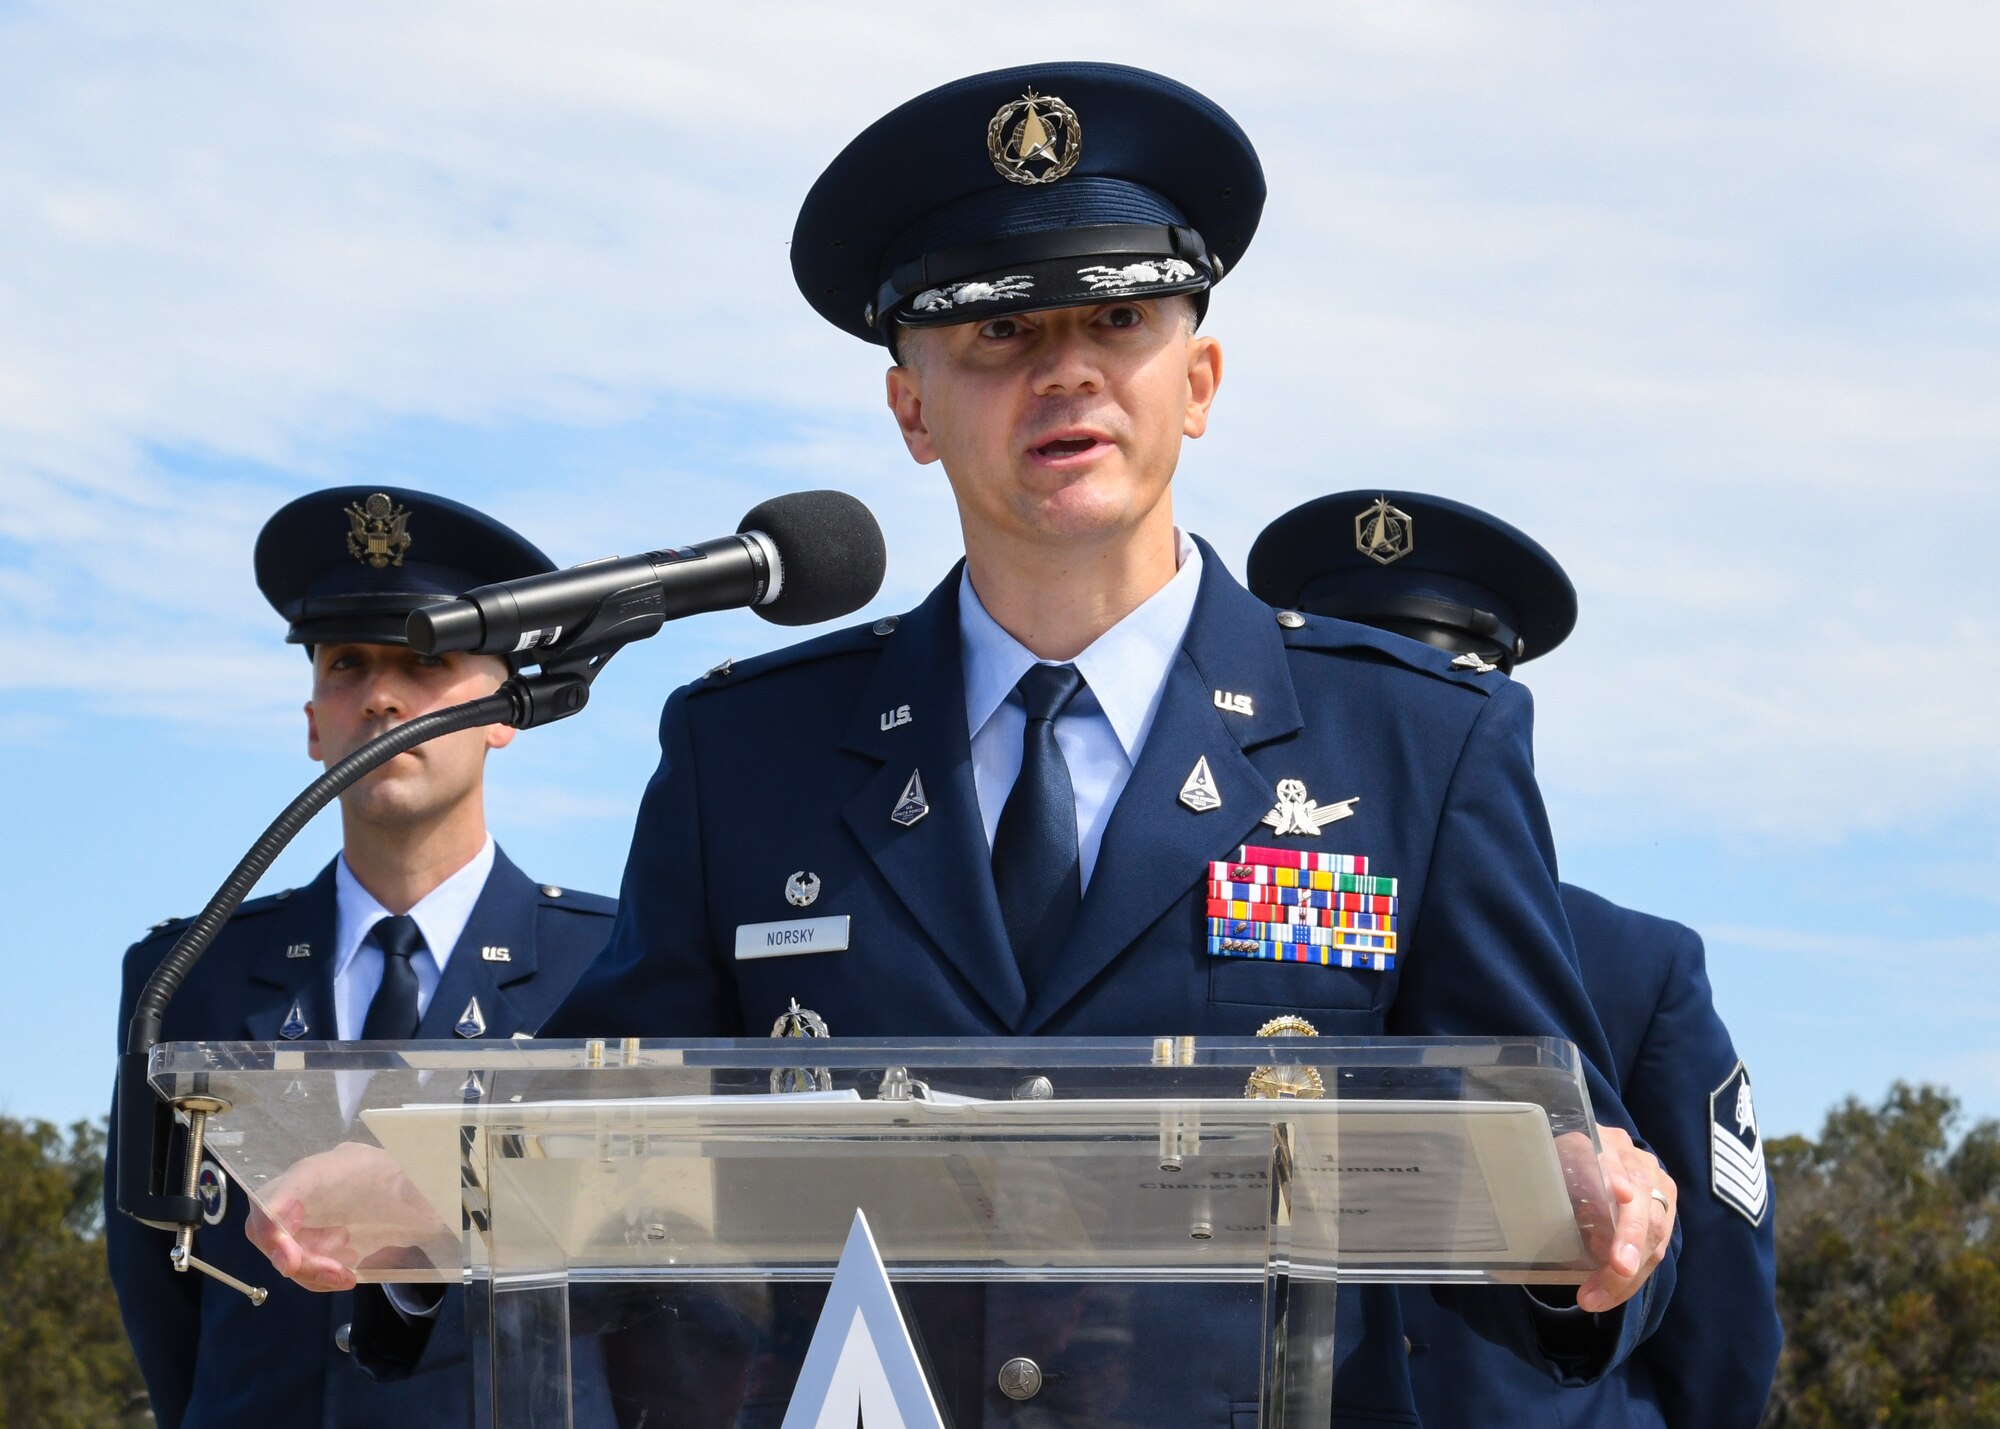 U.S. Space Force Col. Peter Norsky, incoming Delta 1 commander, delivers remarks during the Delta 1 change of command ceremony at Vandenberg Space Force Base, Calif., July 17, 2023. Space Force Col. Jason N. Schramm relinquished command to U.S. Space Force Col. Peter Norsky. U.S. Air Force Maj. Gen. Shawn N. Bratton, Space Training and Readiness Command commander, presided over the ceremony. (U.S. Space Force photo by Senior Airman Rocio Romo)